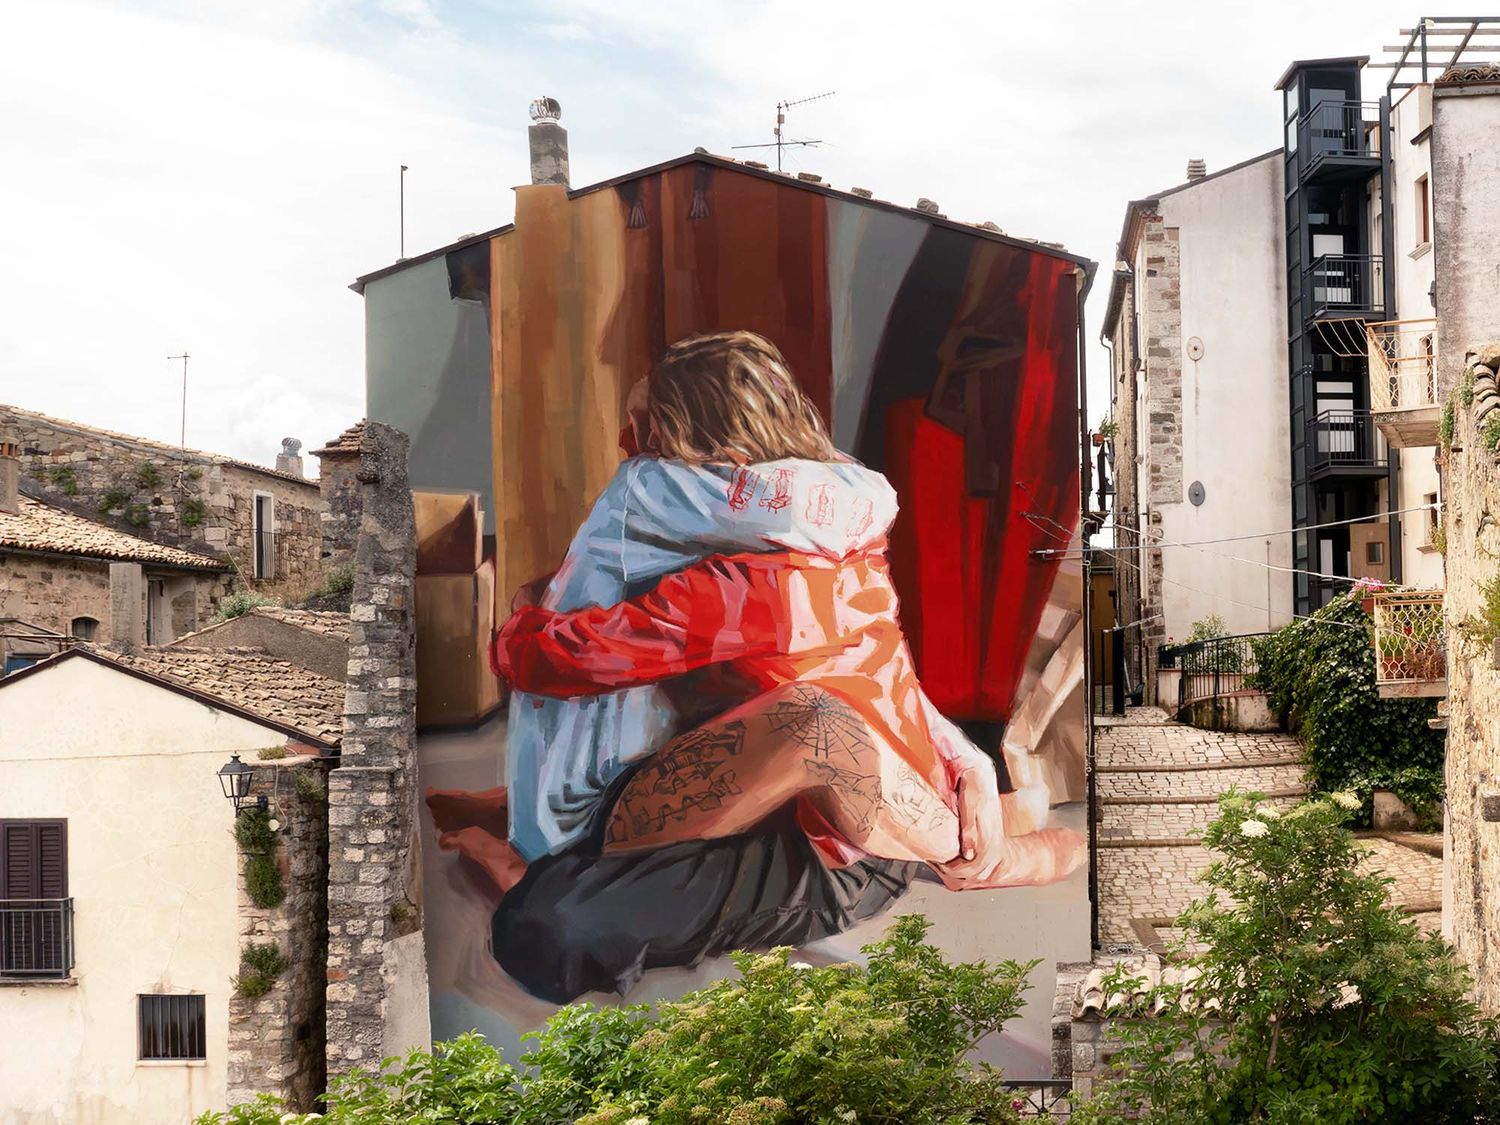 Thanks to the artist Alice Pasquini who created the CVTà Street Fest, Civitacampomarano have known a revival with tourists coming from all over the world to see its murals (©I. Cox / @ Helen Bur).